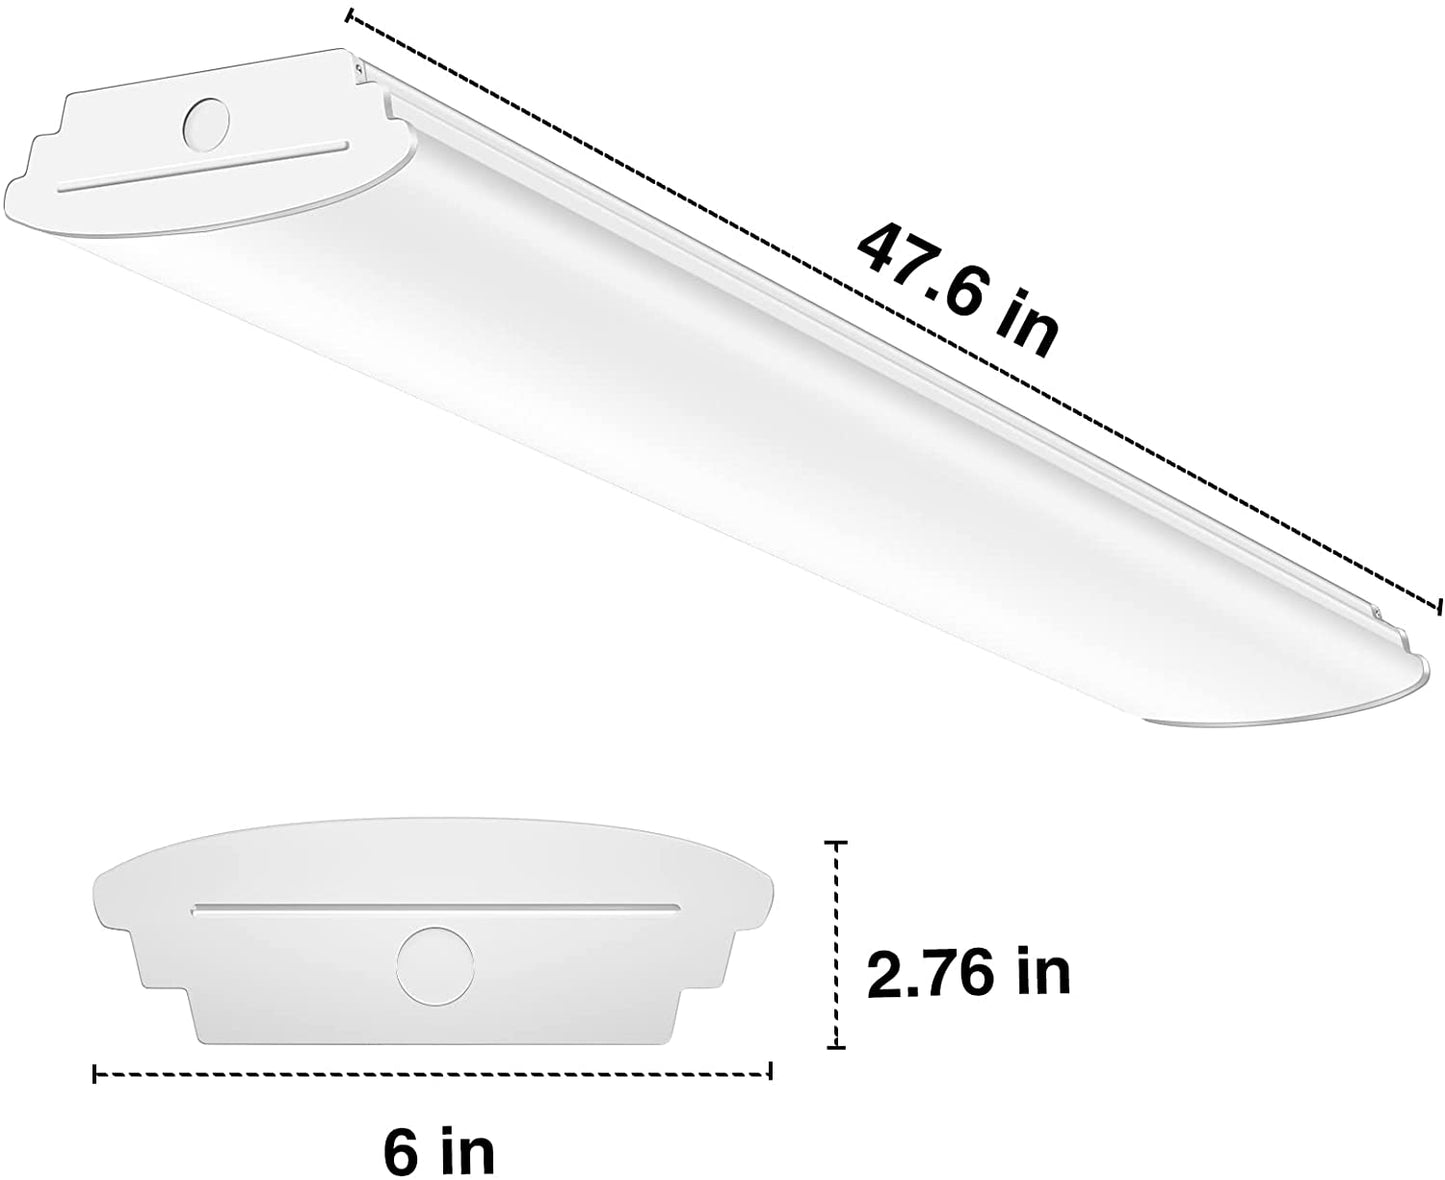 AntLux 4FT LED Wraparound Light Fixtures 4800LM, 4000K Neutral White 4 Foot LED Light, 40W(100W Eqv.) Flush Mount Integrated Linear Garage Shop Ceiling Lights for Laundry Room, Fluorescent Replacement